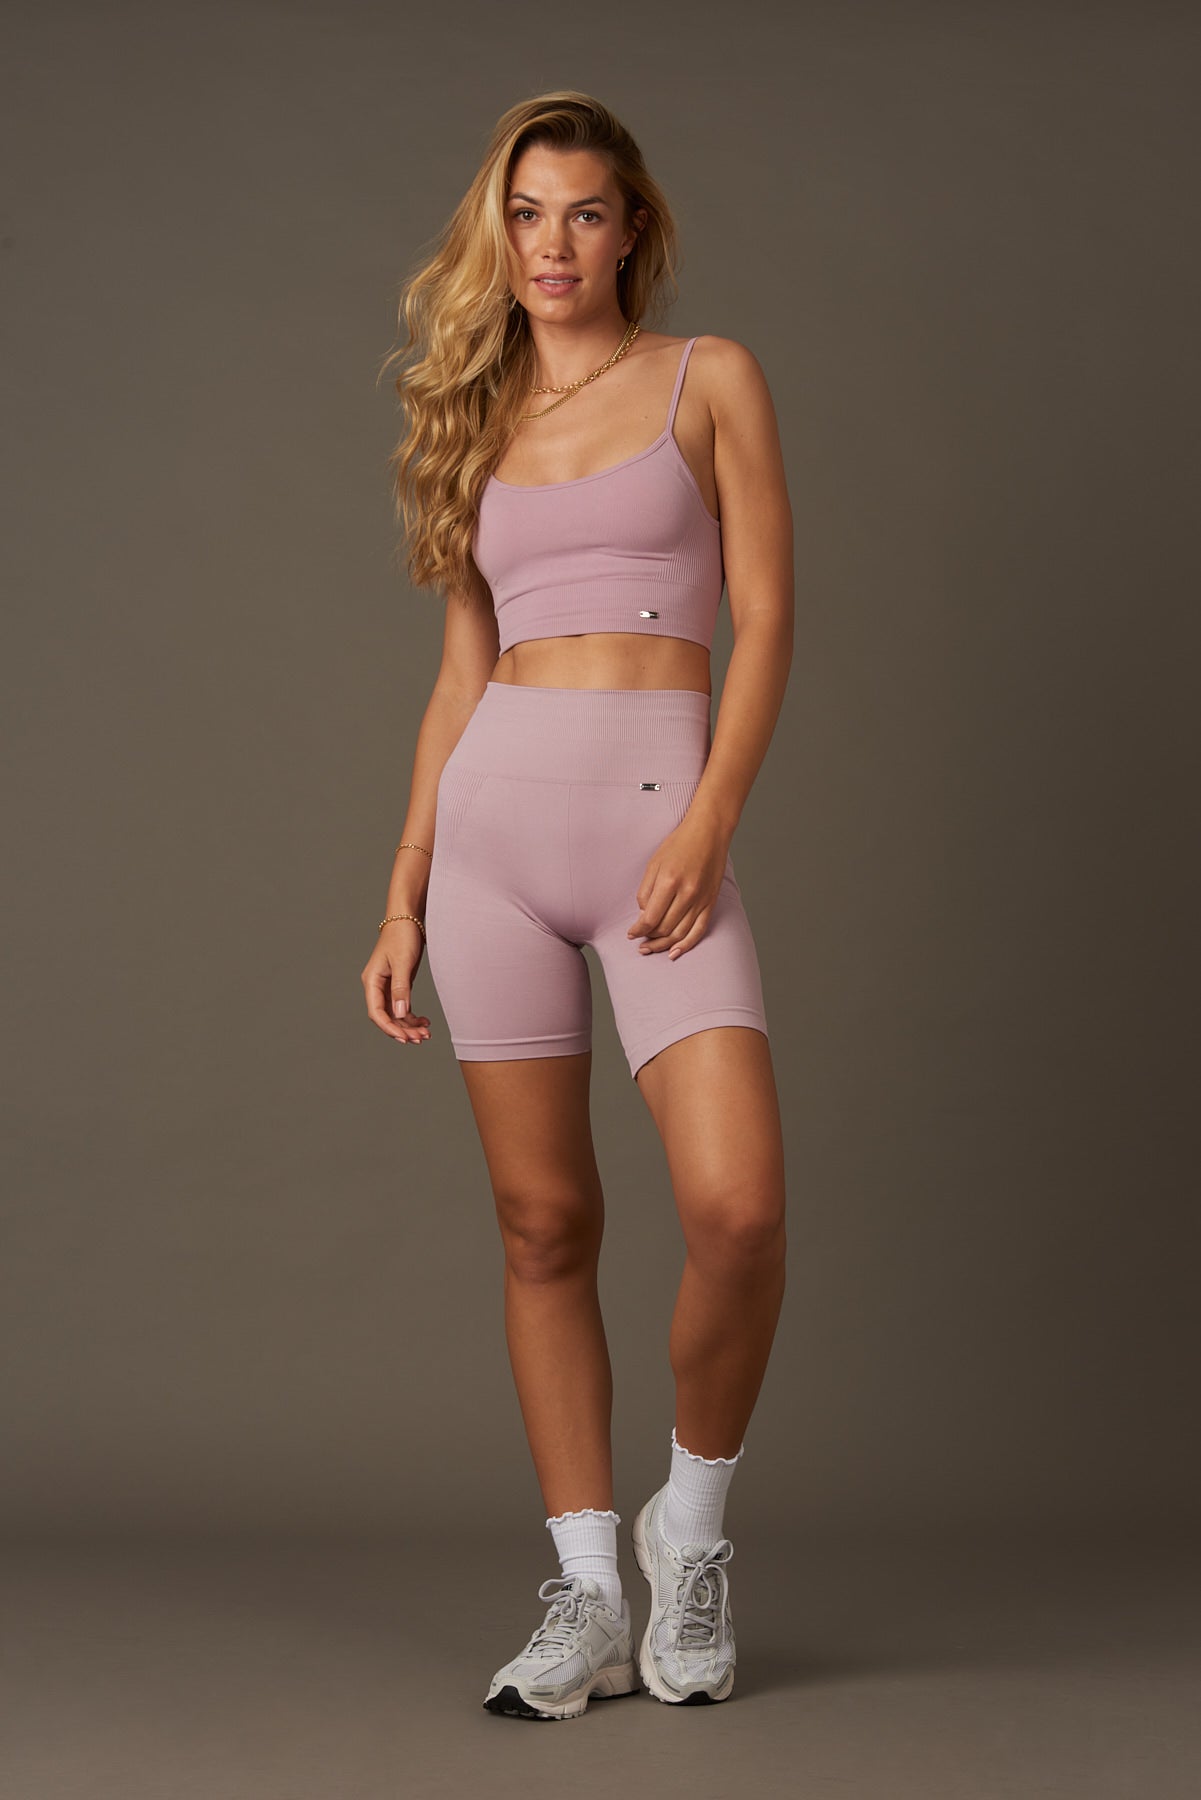 Bliss Biker Push-Up in Mauve Washed-Bikers-Shop Sustainable Recycled Yoga Leggings Women's Clothing On-line Barcelona Believe Athletics Sustainable Recycled Yoga Clothes